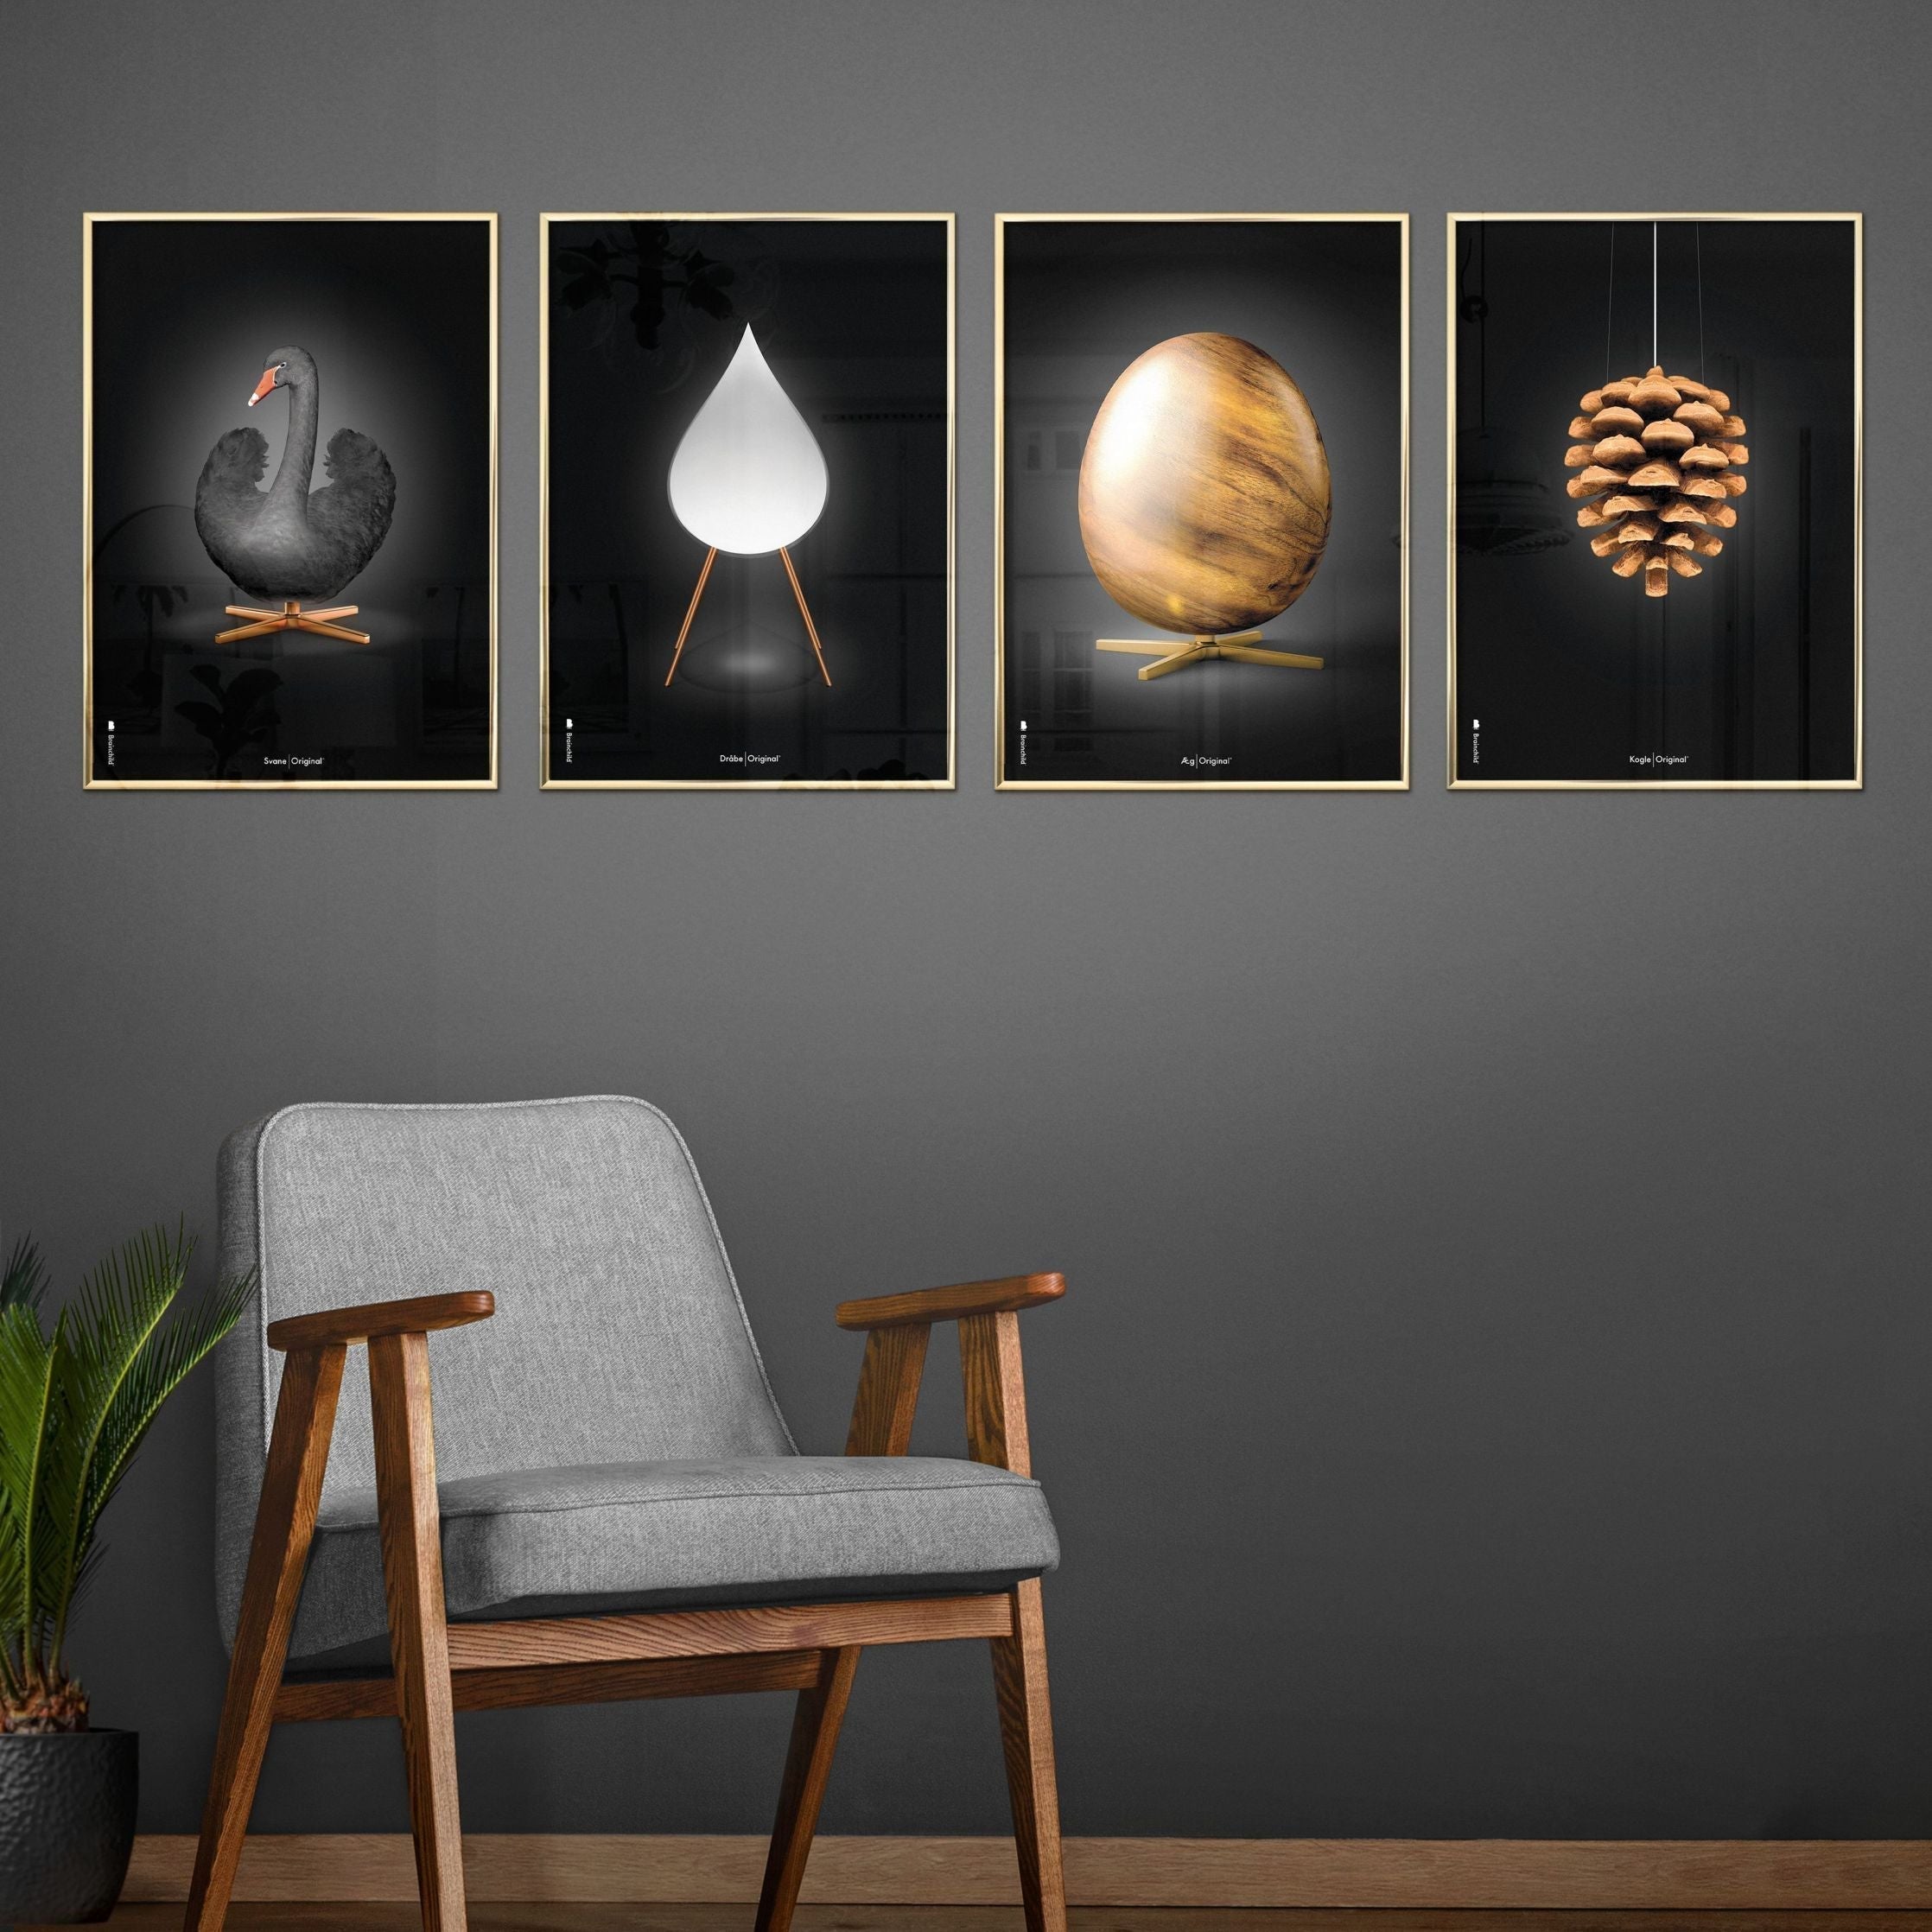 Brainchild Swan Classic Poster, Frame In Black Lacquered Wood 70 X100 Cm, Black/Black Background